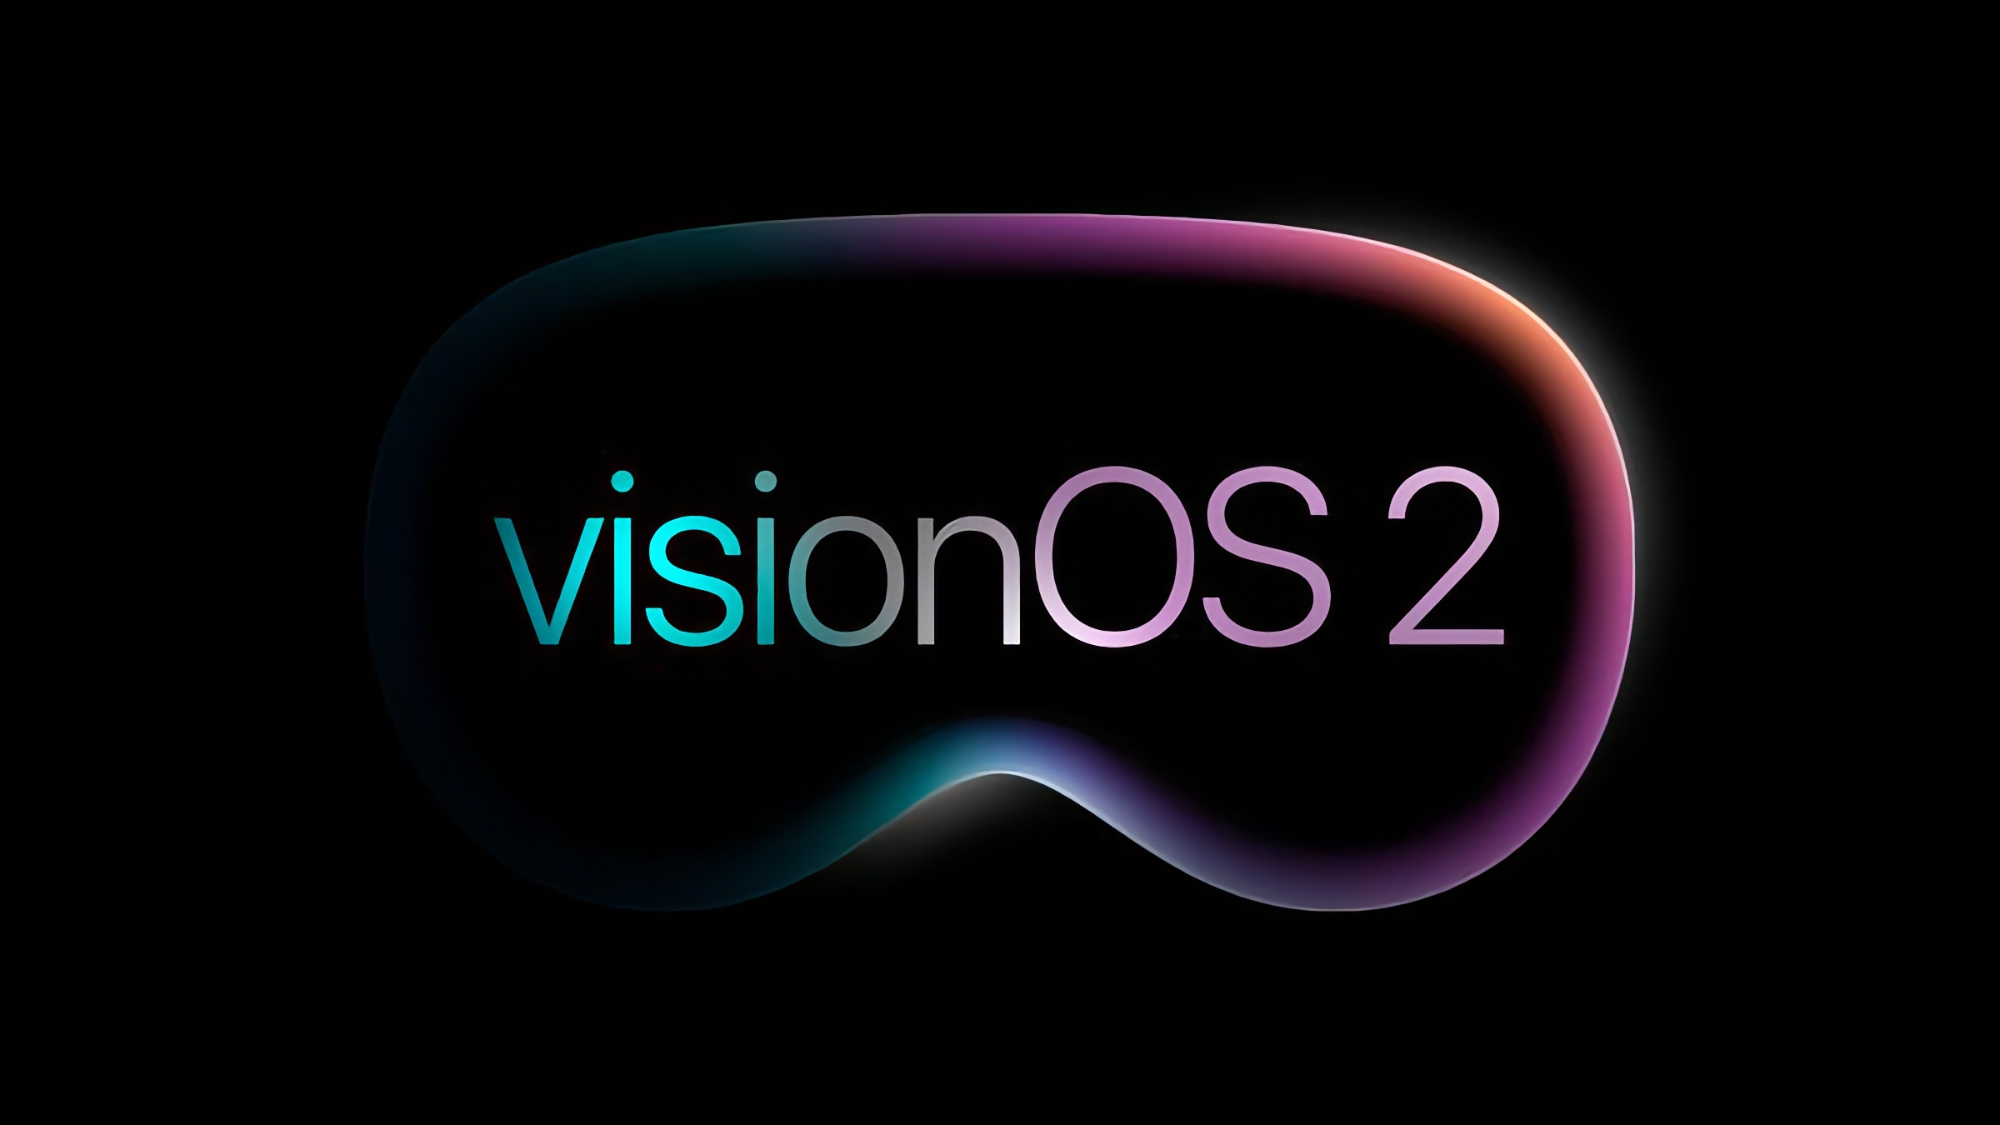 Apple has launched testing of visionOS 2 Beta 3